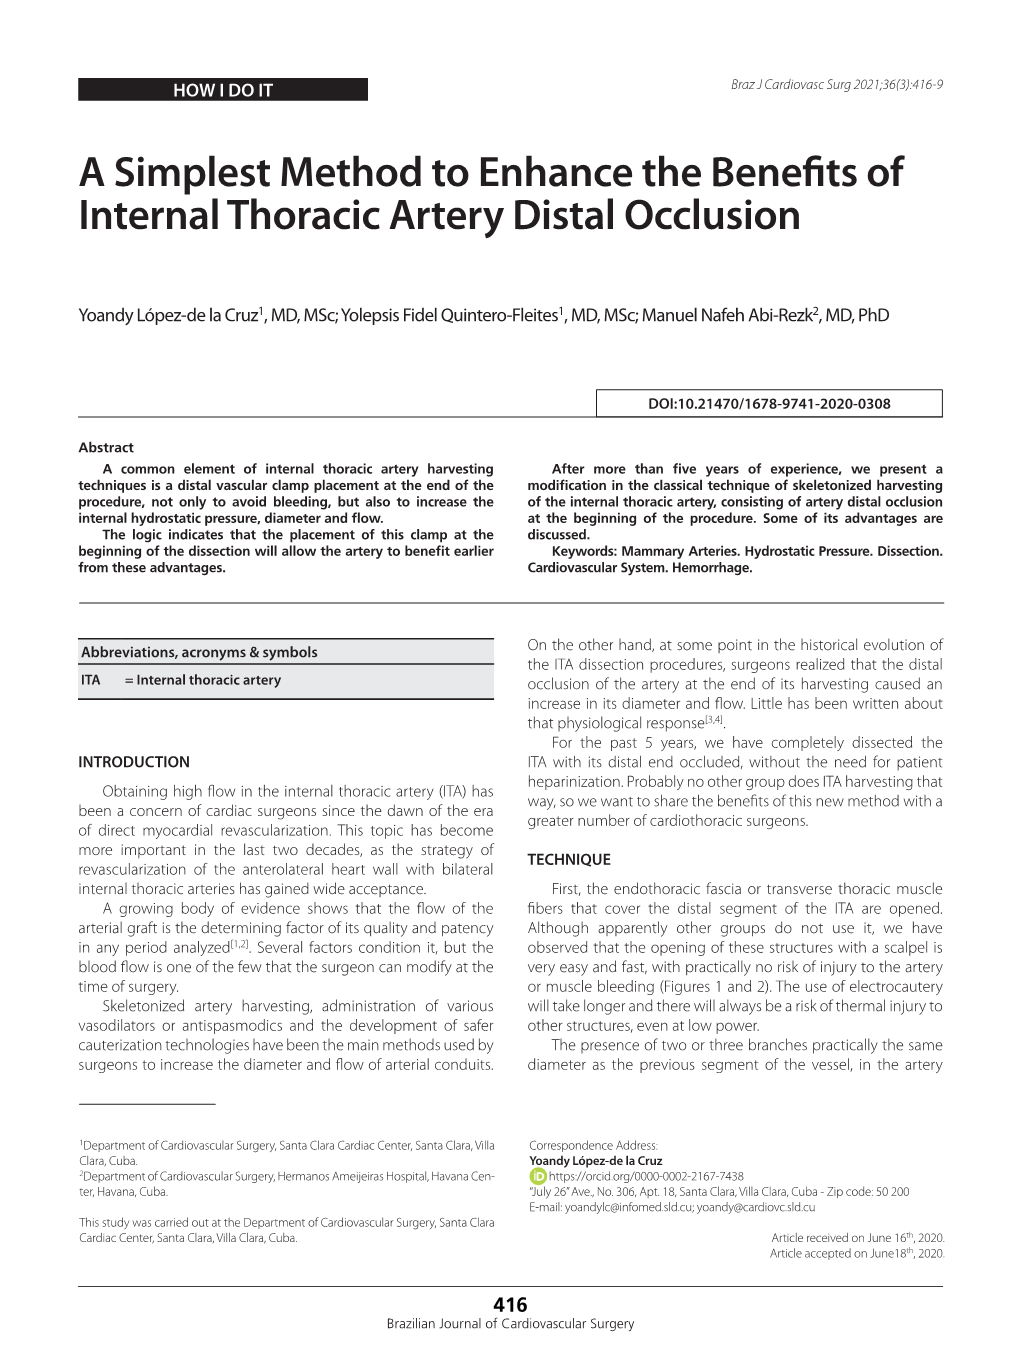 A Simplest Method to Enhance the Benefits of Internal Thoracic Artery Distal Occlusion